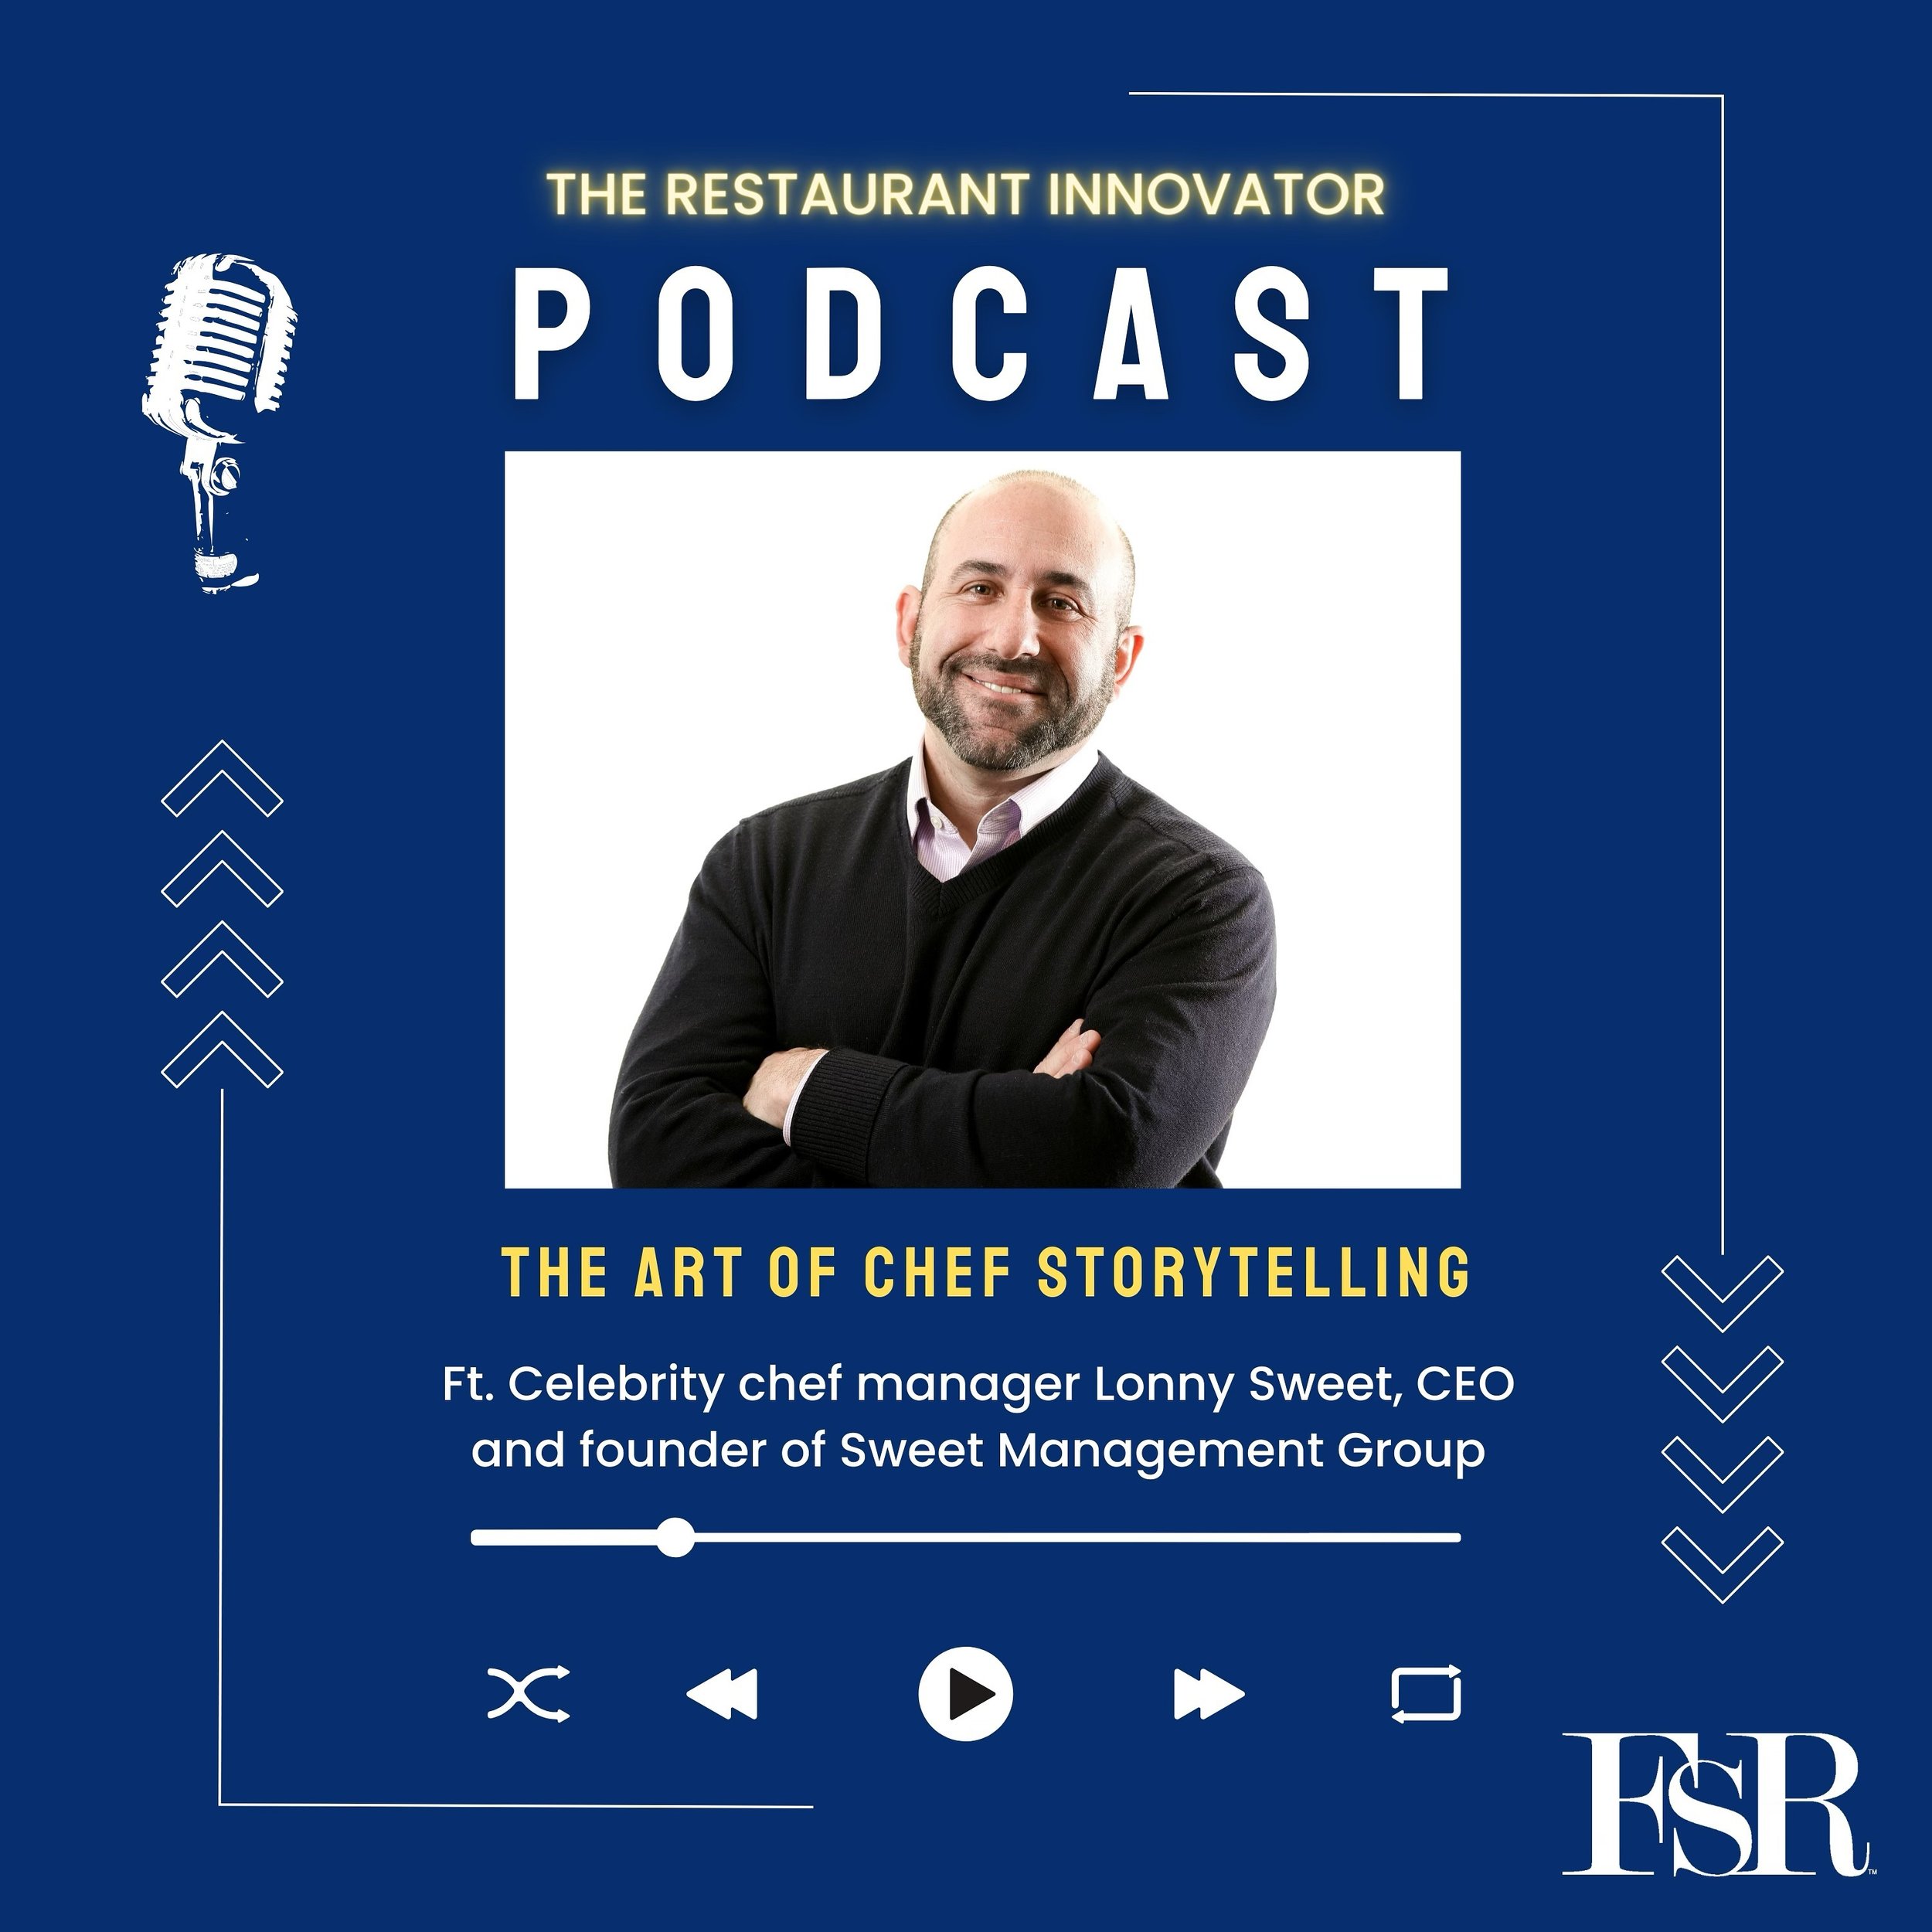 Who better to speak on how best to elongate chefs careers through great storytelling and brand partnerships than our very own CEO and Founder @sweet5151! He was recently featured on The Restaurant Innovator podcast by @fsrmagazine 

Check it out! Lin